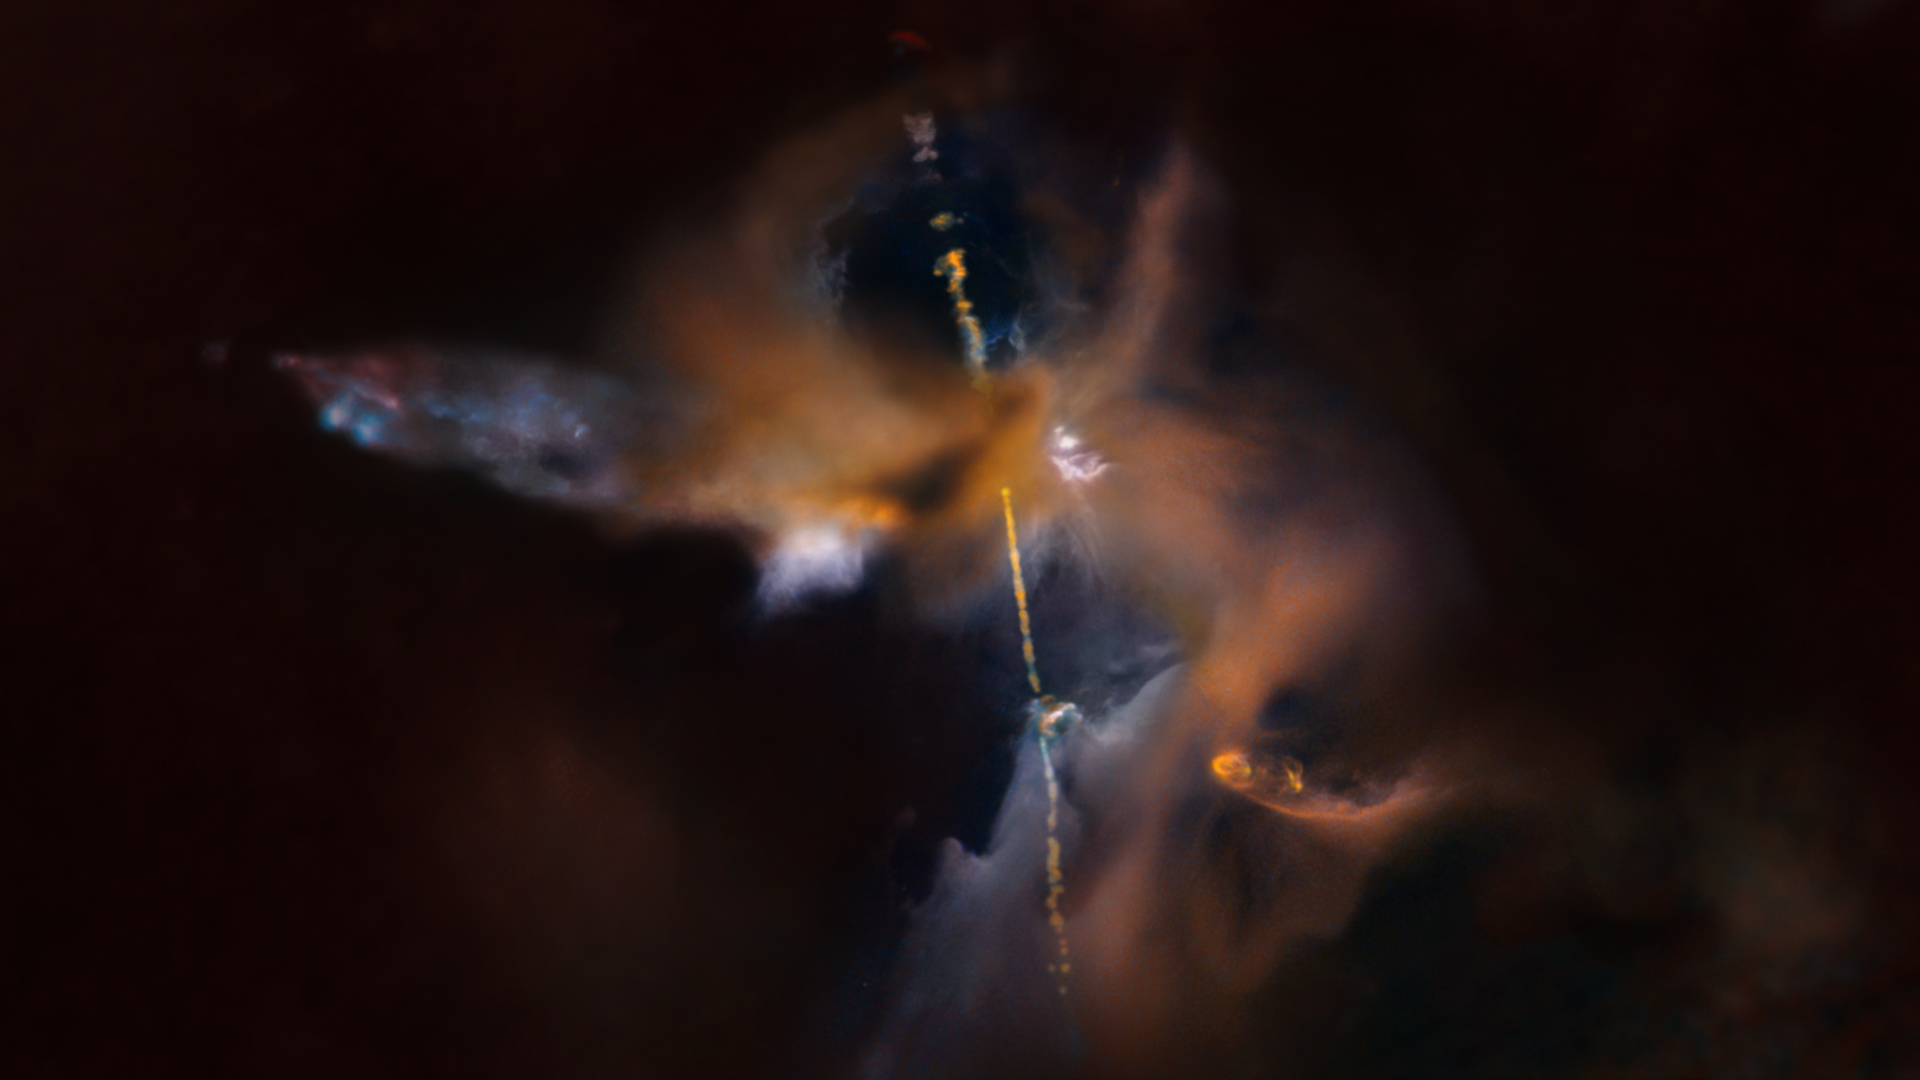 This visualization combines a two-dimensional zoom and a three-dimensional flight to showcase the resemblance to a double-bladed lightsaber seen in the Hubble Space Telescope's striking image of the Herbig-Haro object known as HH24.